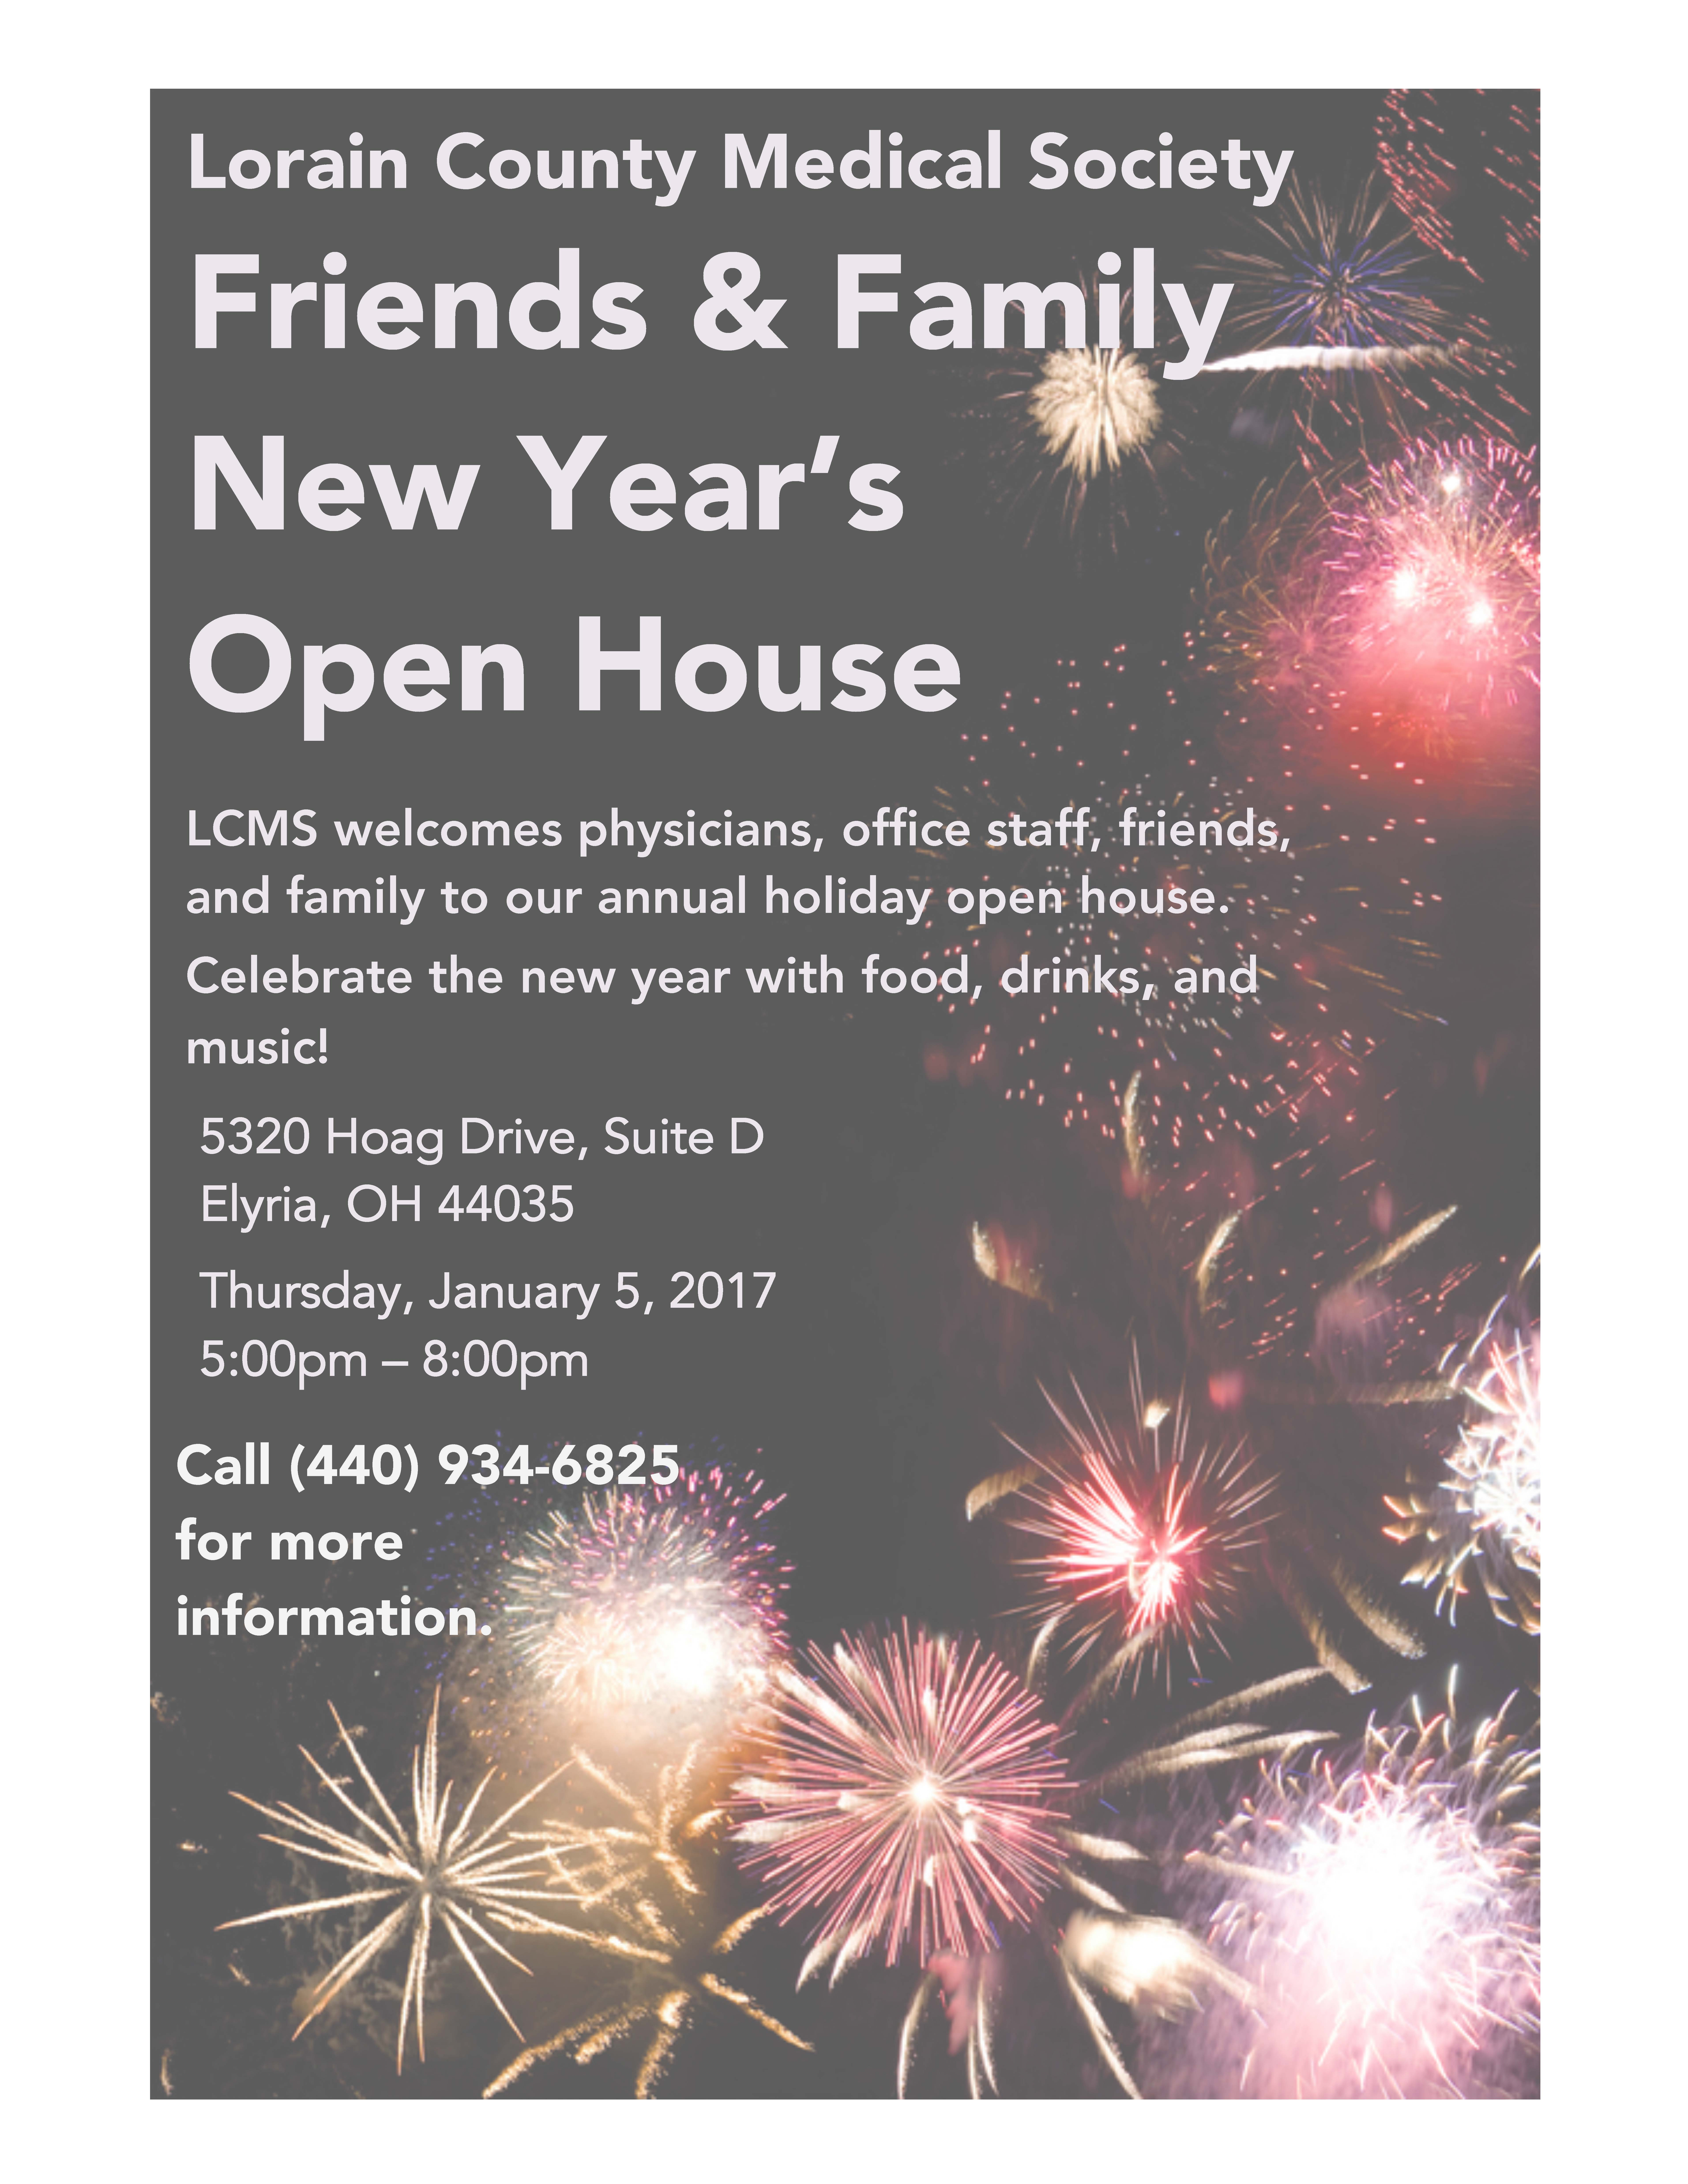 LCMS New Year's Open House Flyer